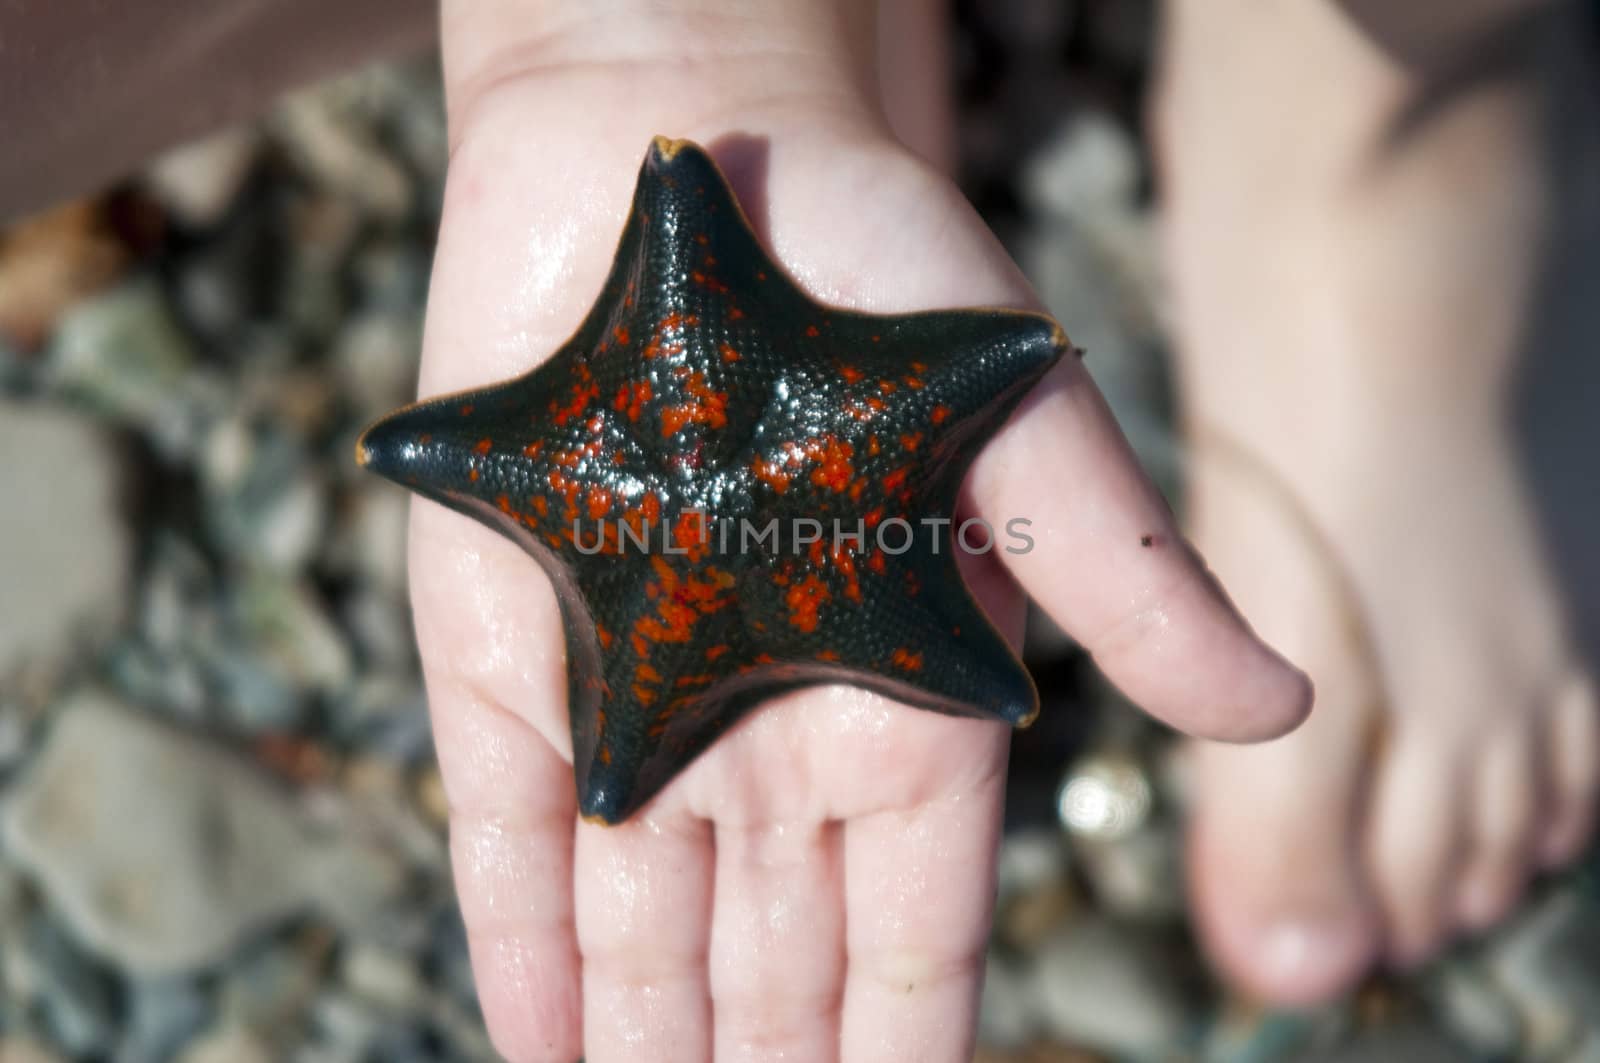 High resolution image. The starfish lays on a palm of the child.